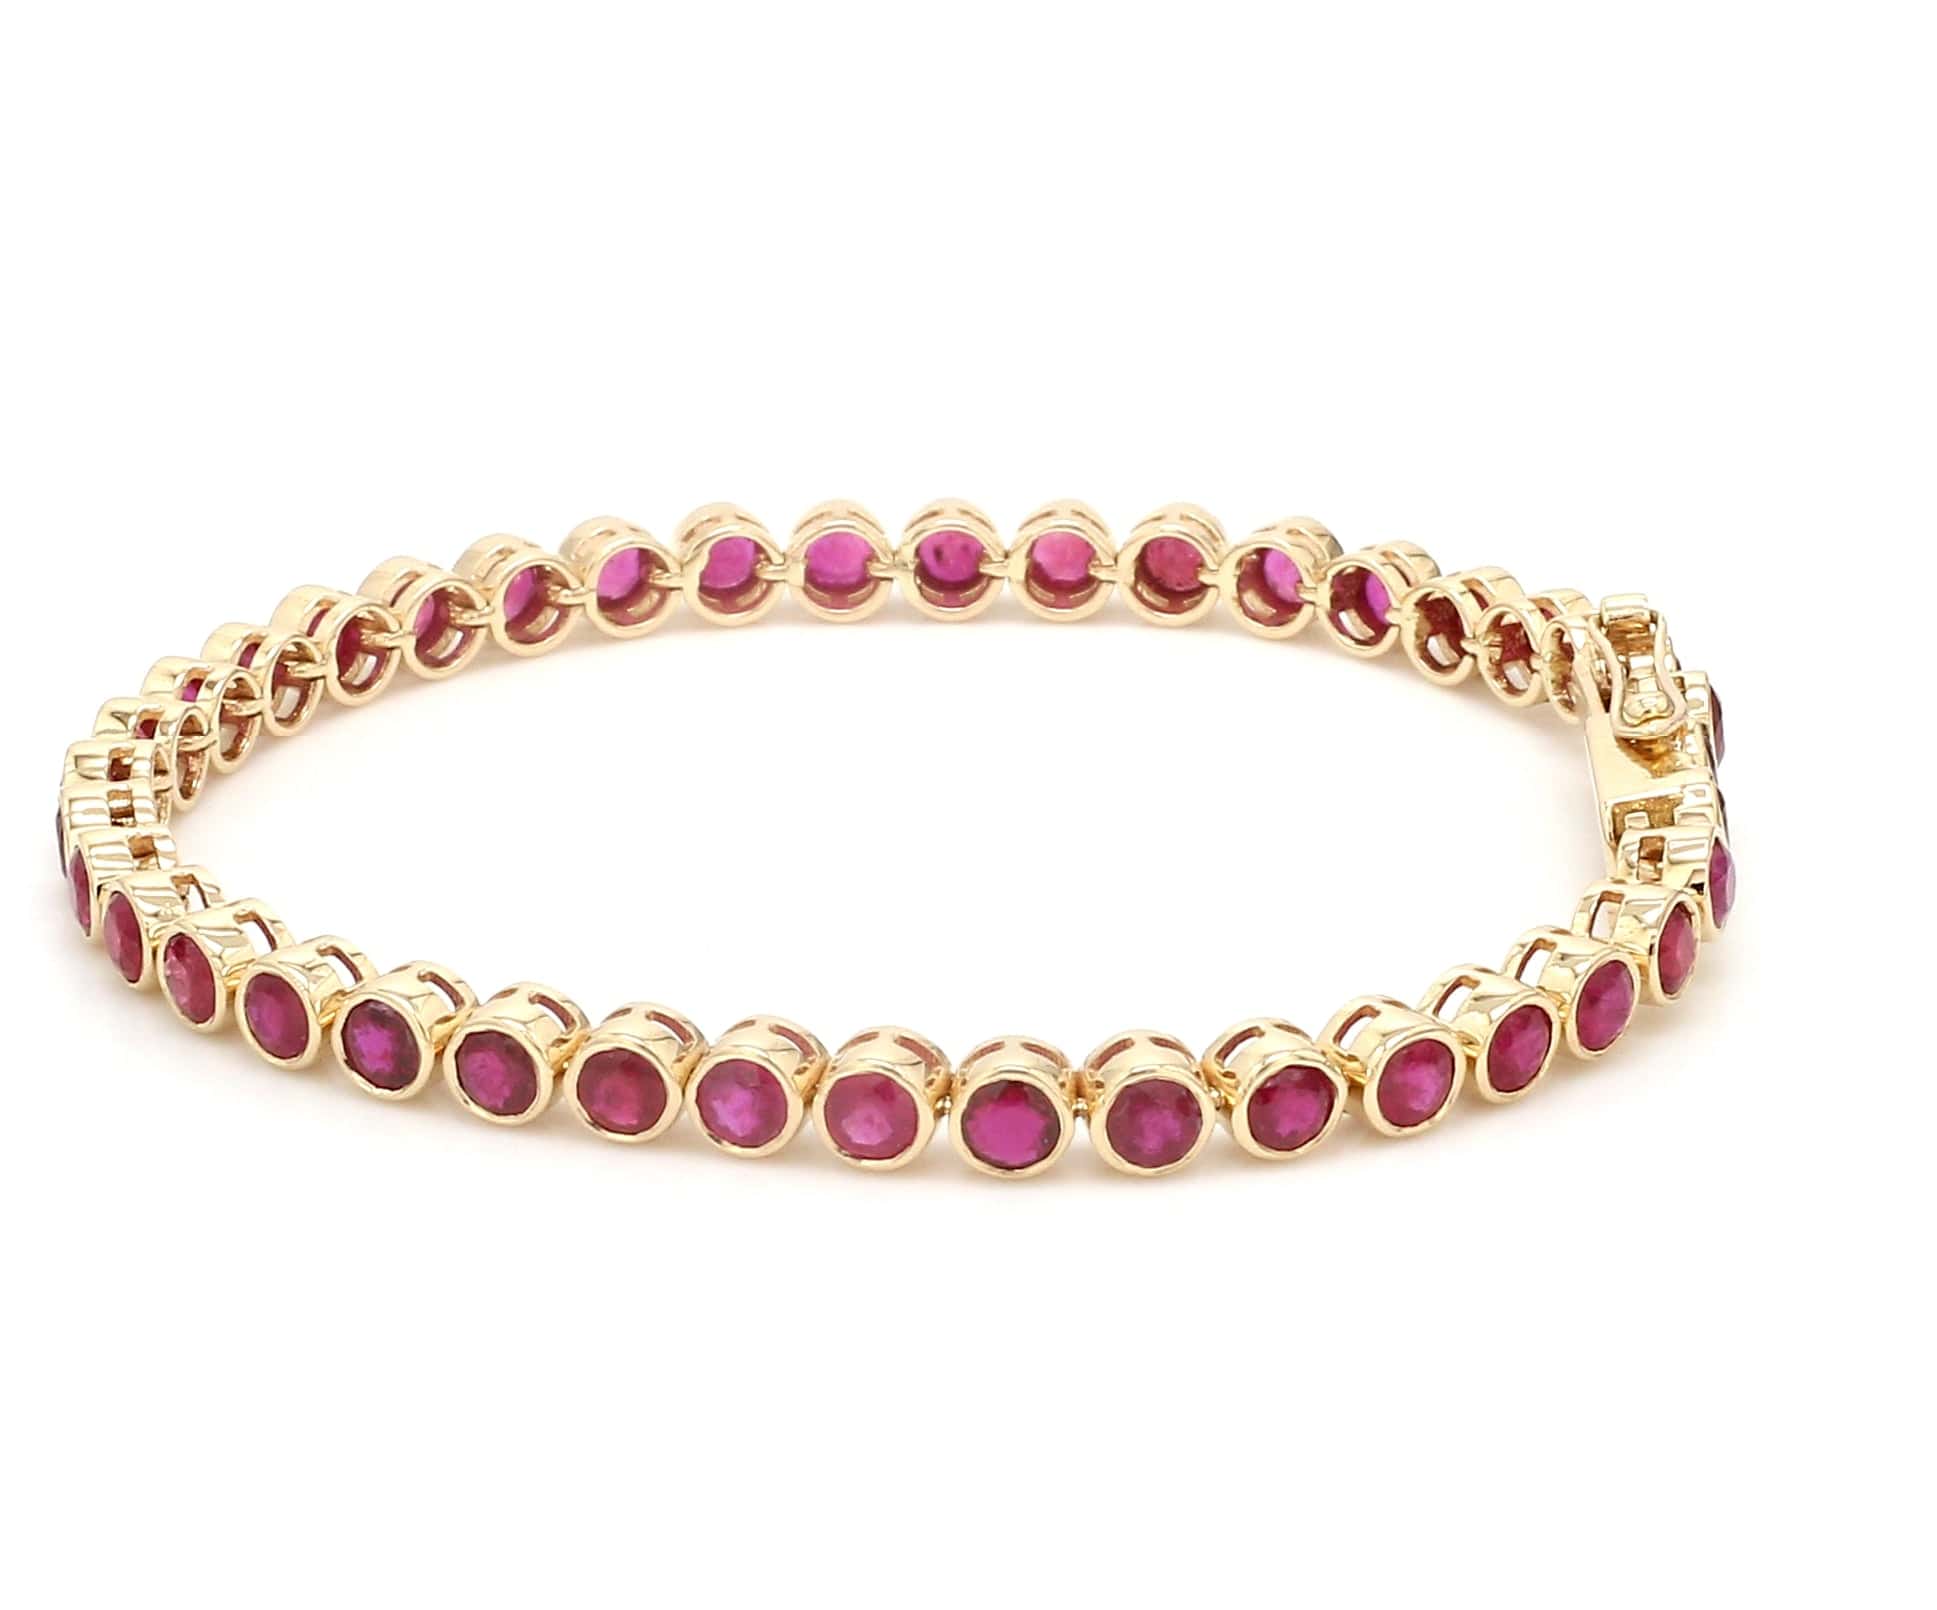 Burmese Ruby Bracelet made in 18k Yellow Gold ( 21.67cts Ruby) - Custom  Title by chrisjewels